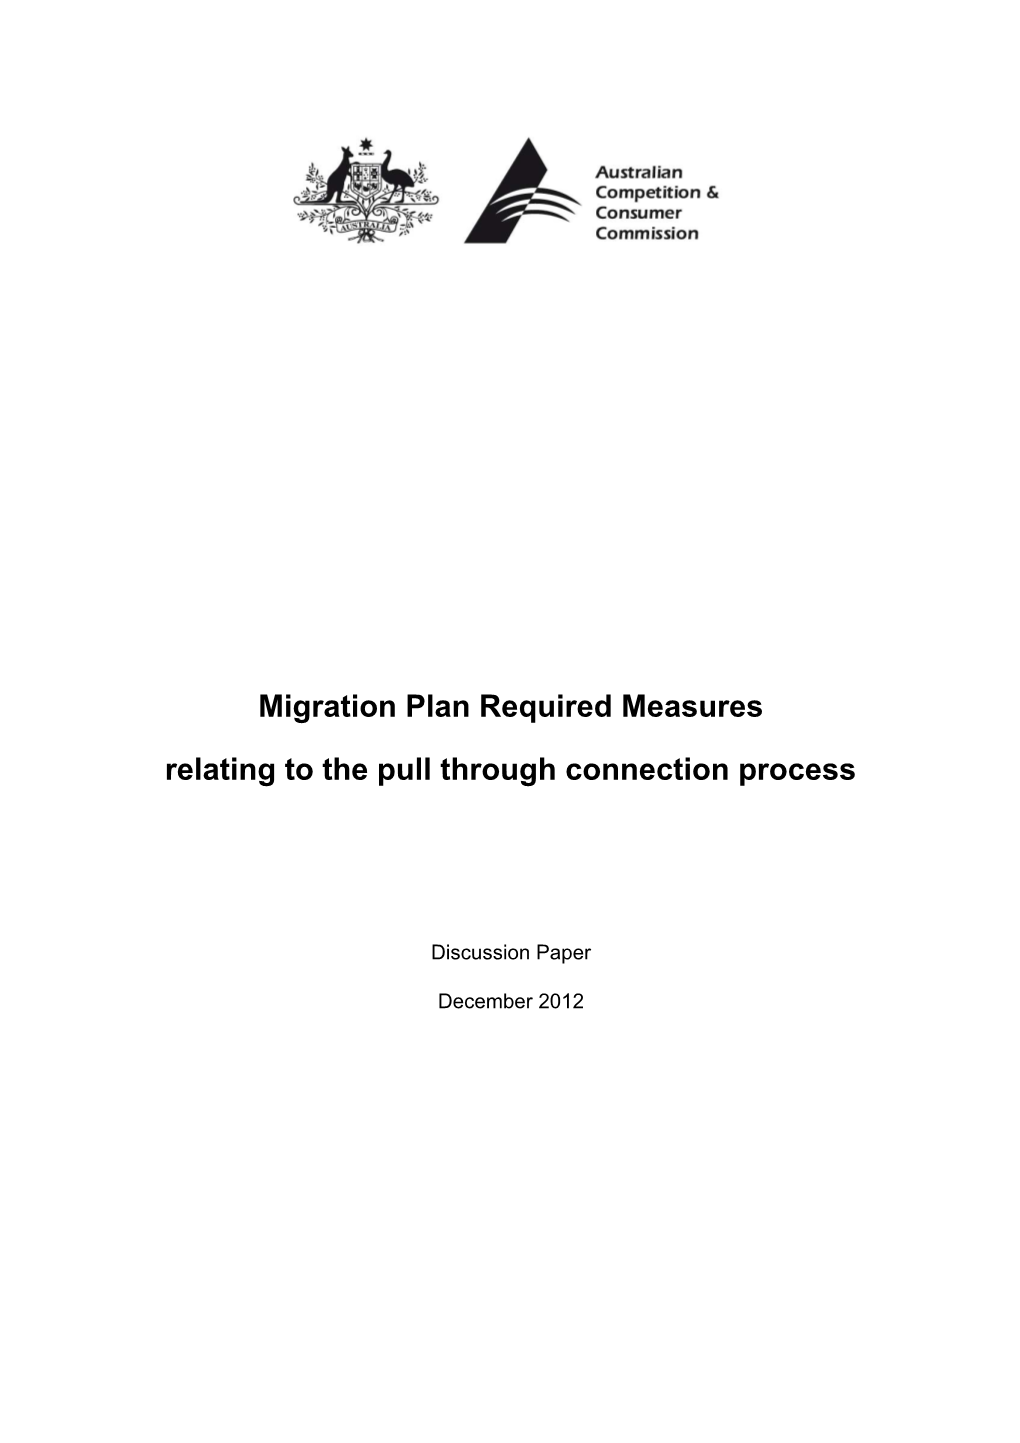 Migration Plan Required Measures Relating to the Pull Through Connection Process Discussion